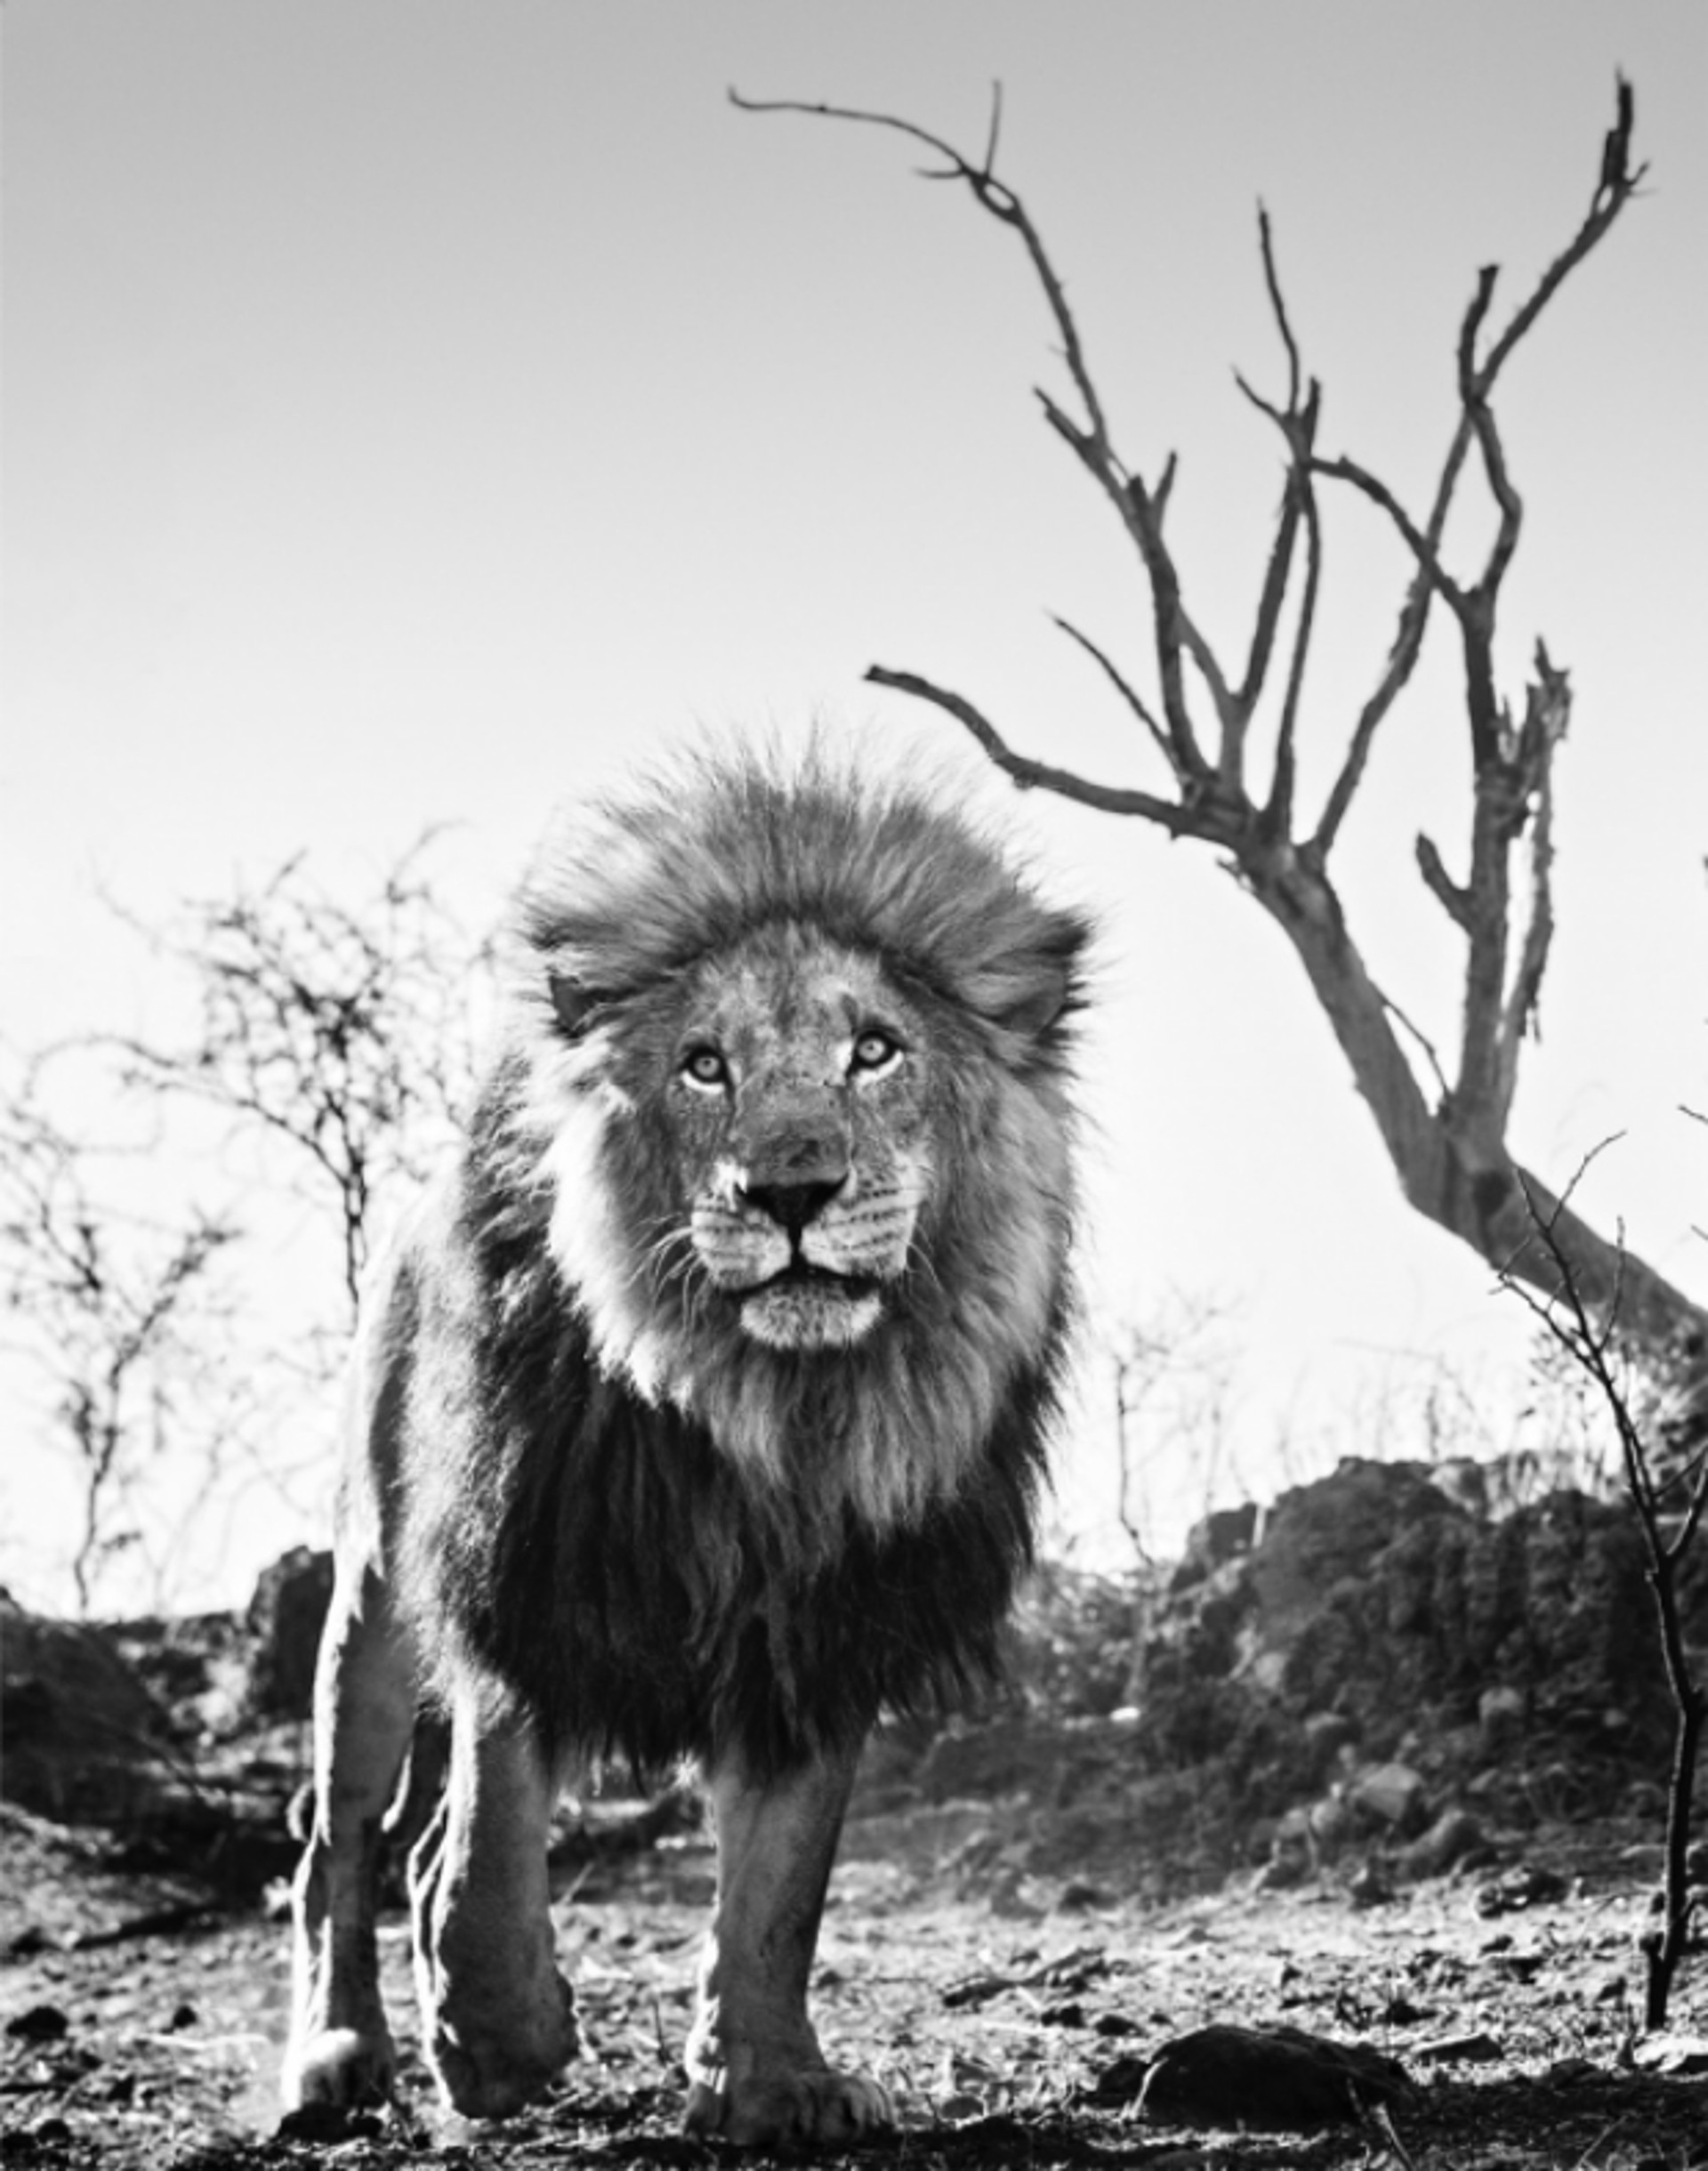 Cry Me A River by David Yarrow